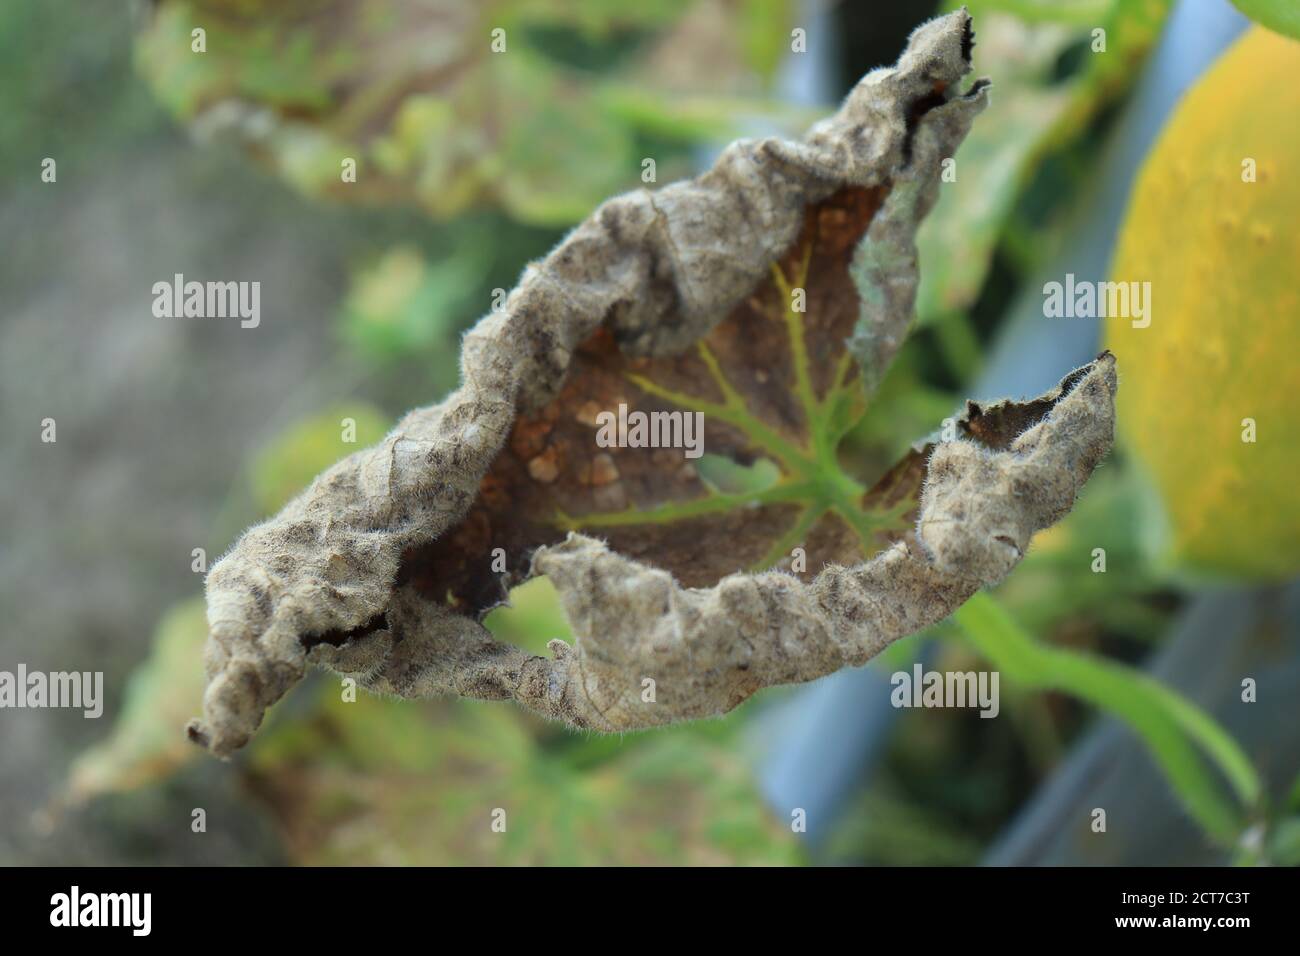 Disease on the leaves of the cucumber plant with a disease in the vegetable garden caused by the fungus Pseudoperonospora cubensis Stock Photo